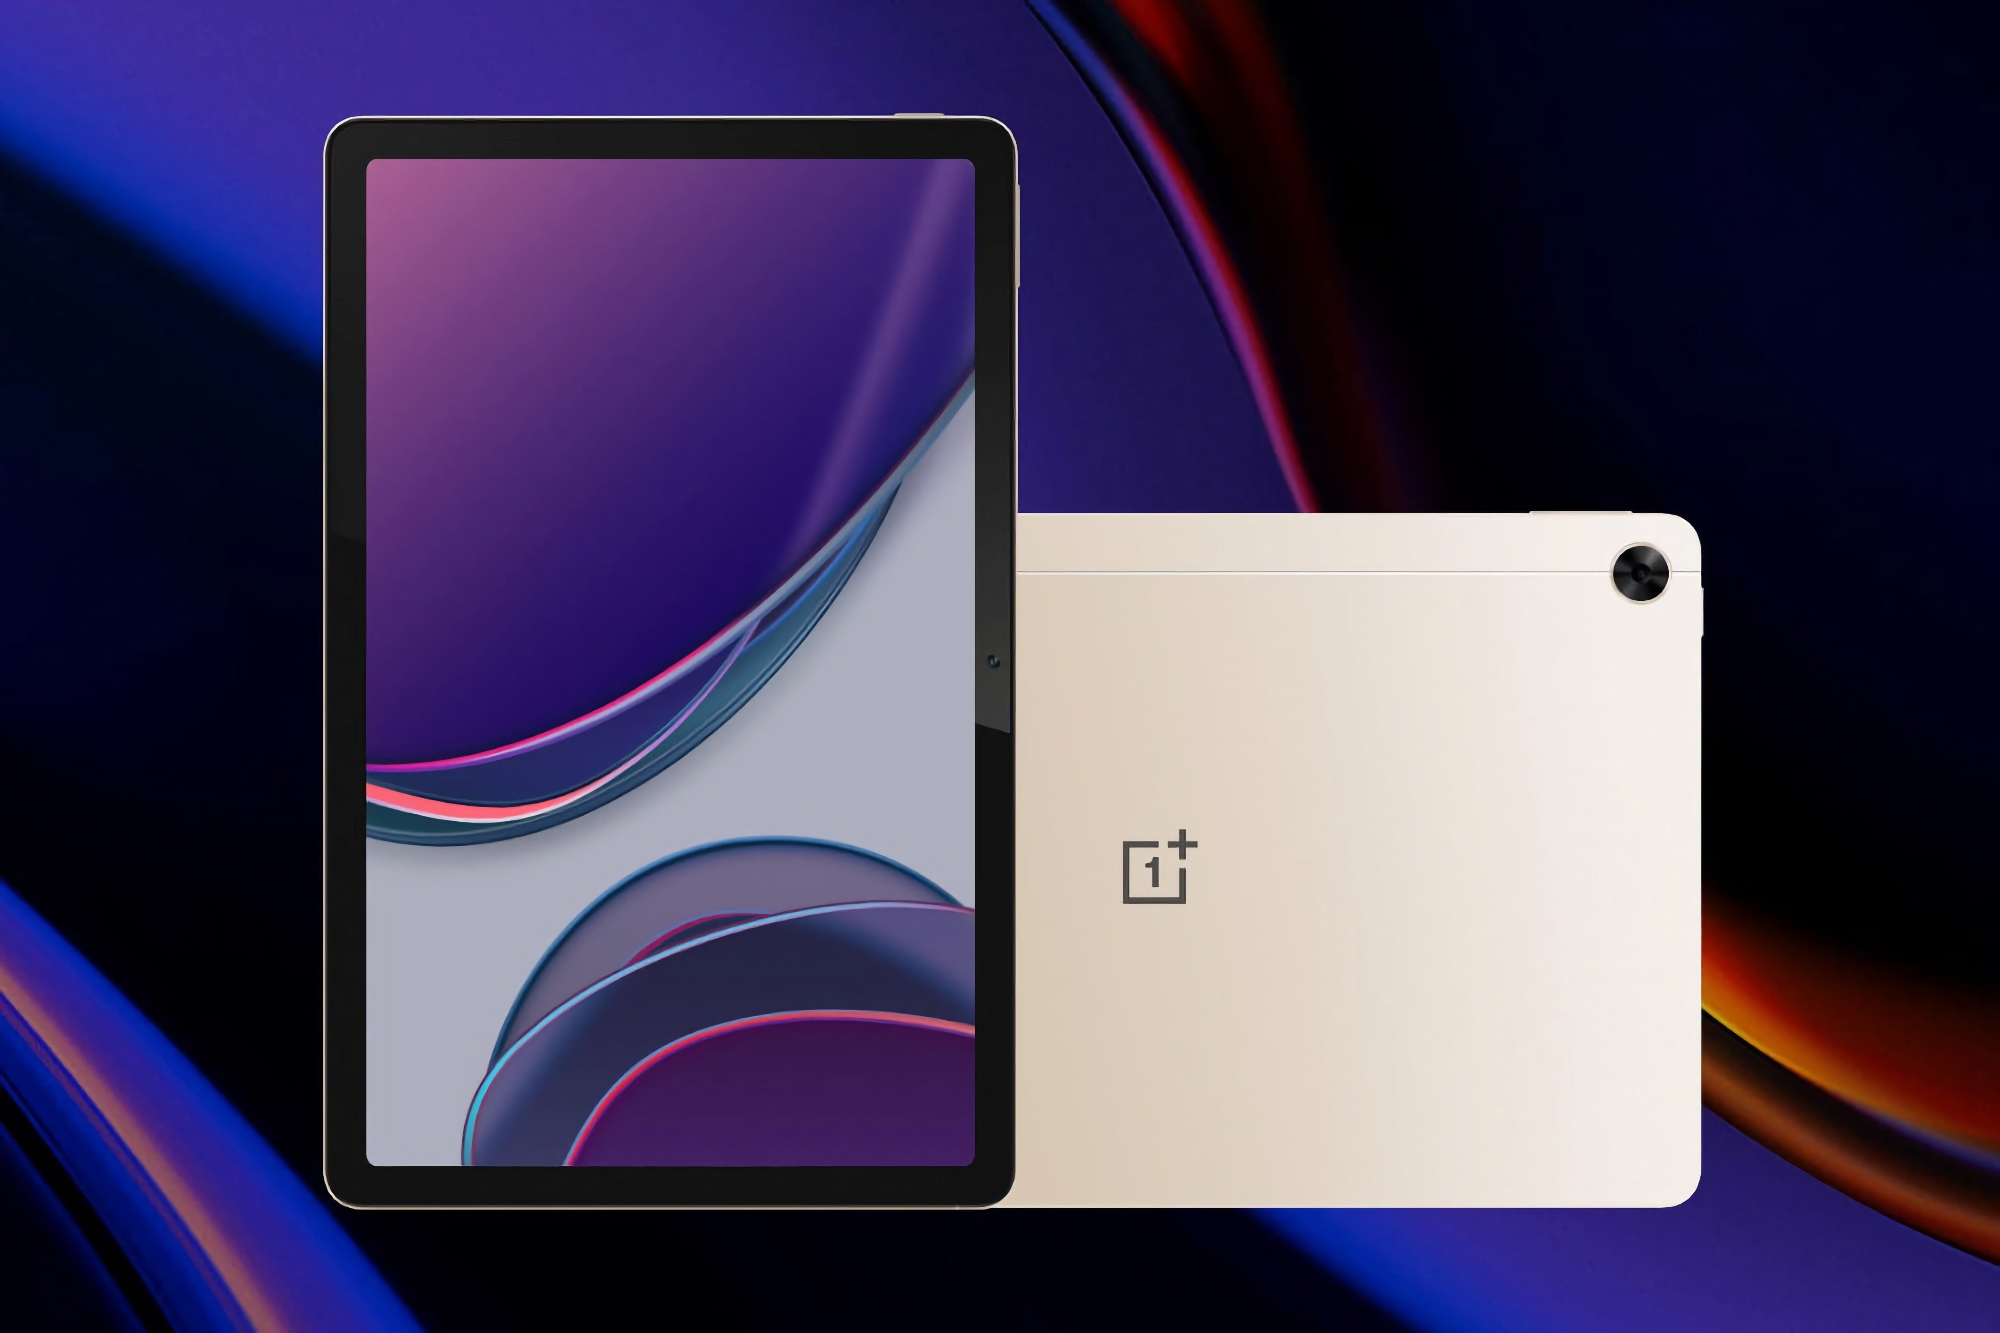 Insider: OnePlus is working on its first tablet, the device will be presented in 2023